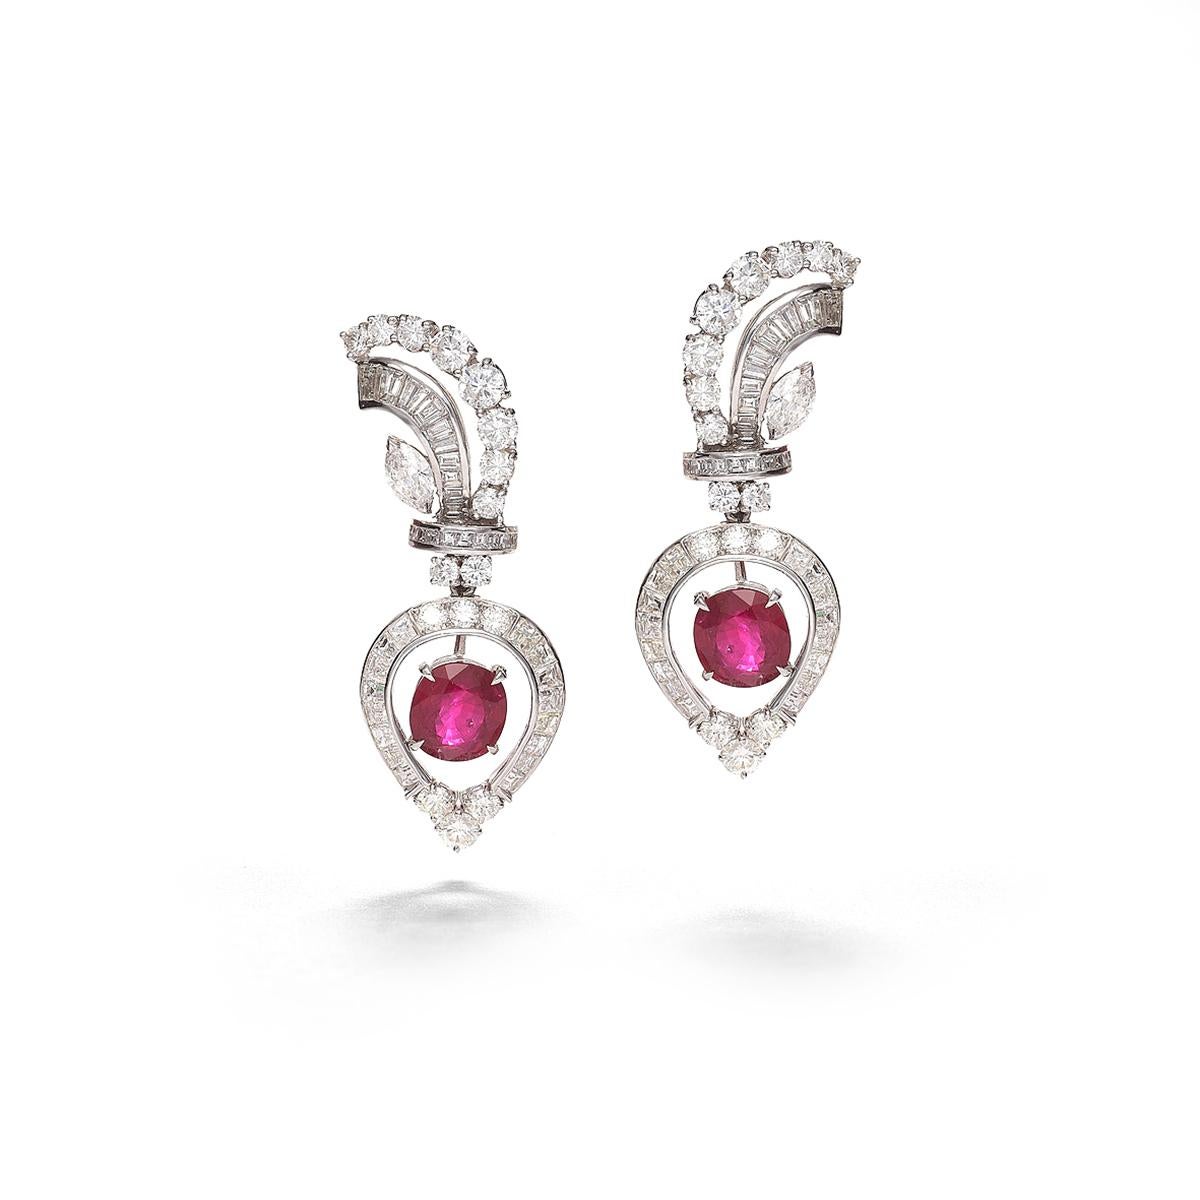 Round Cut Diamond Earrings with Rubies For Sale